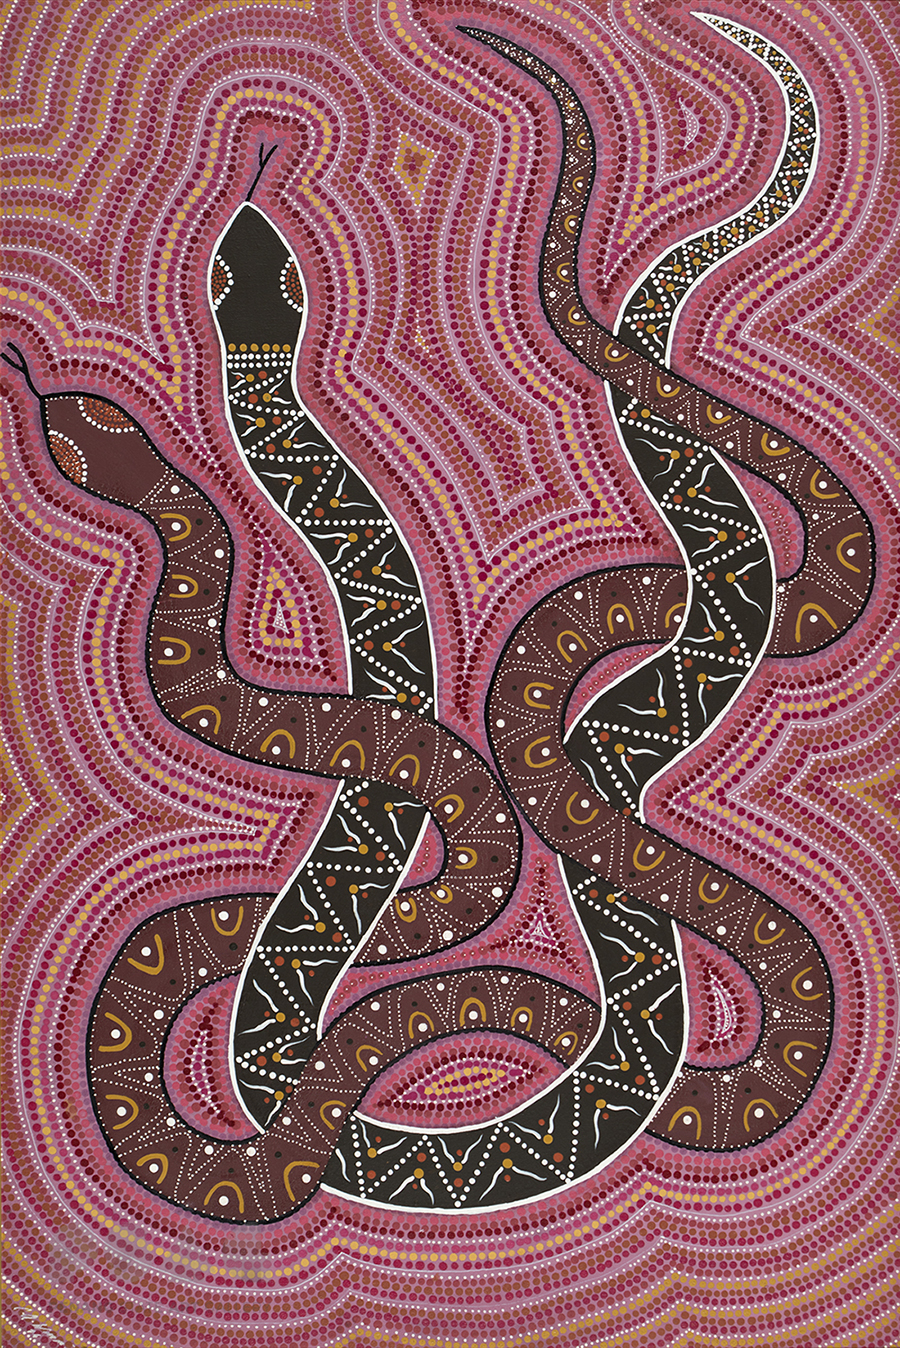 Serpent Dreaming